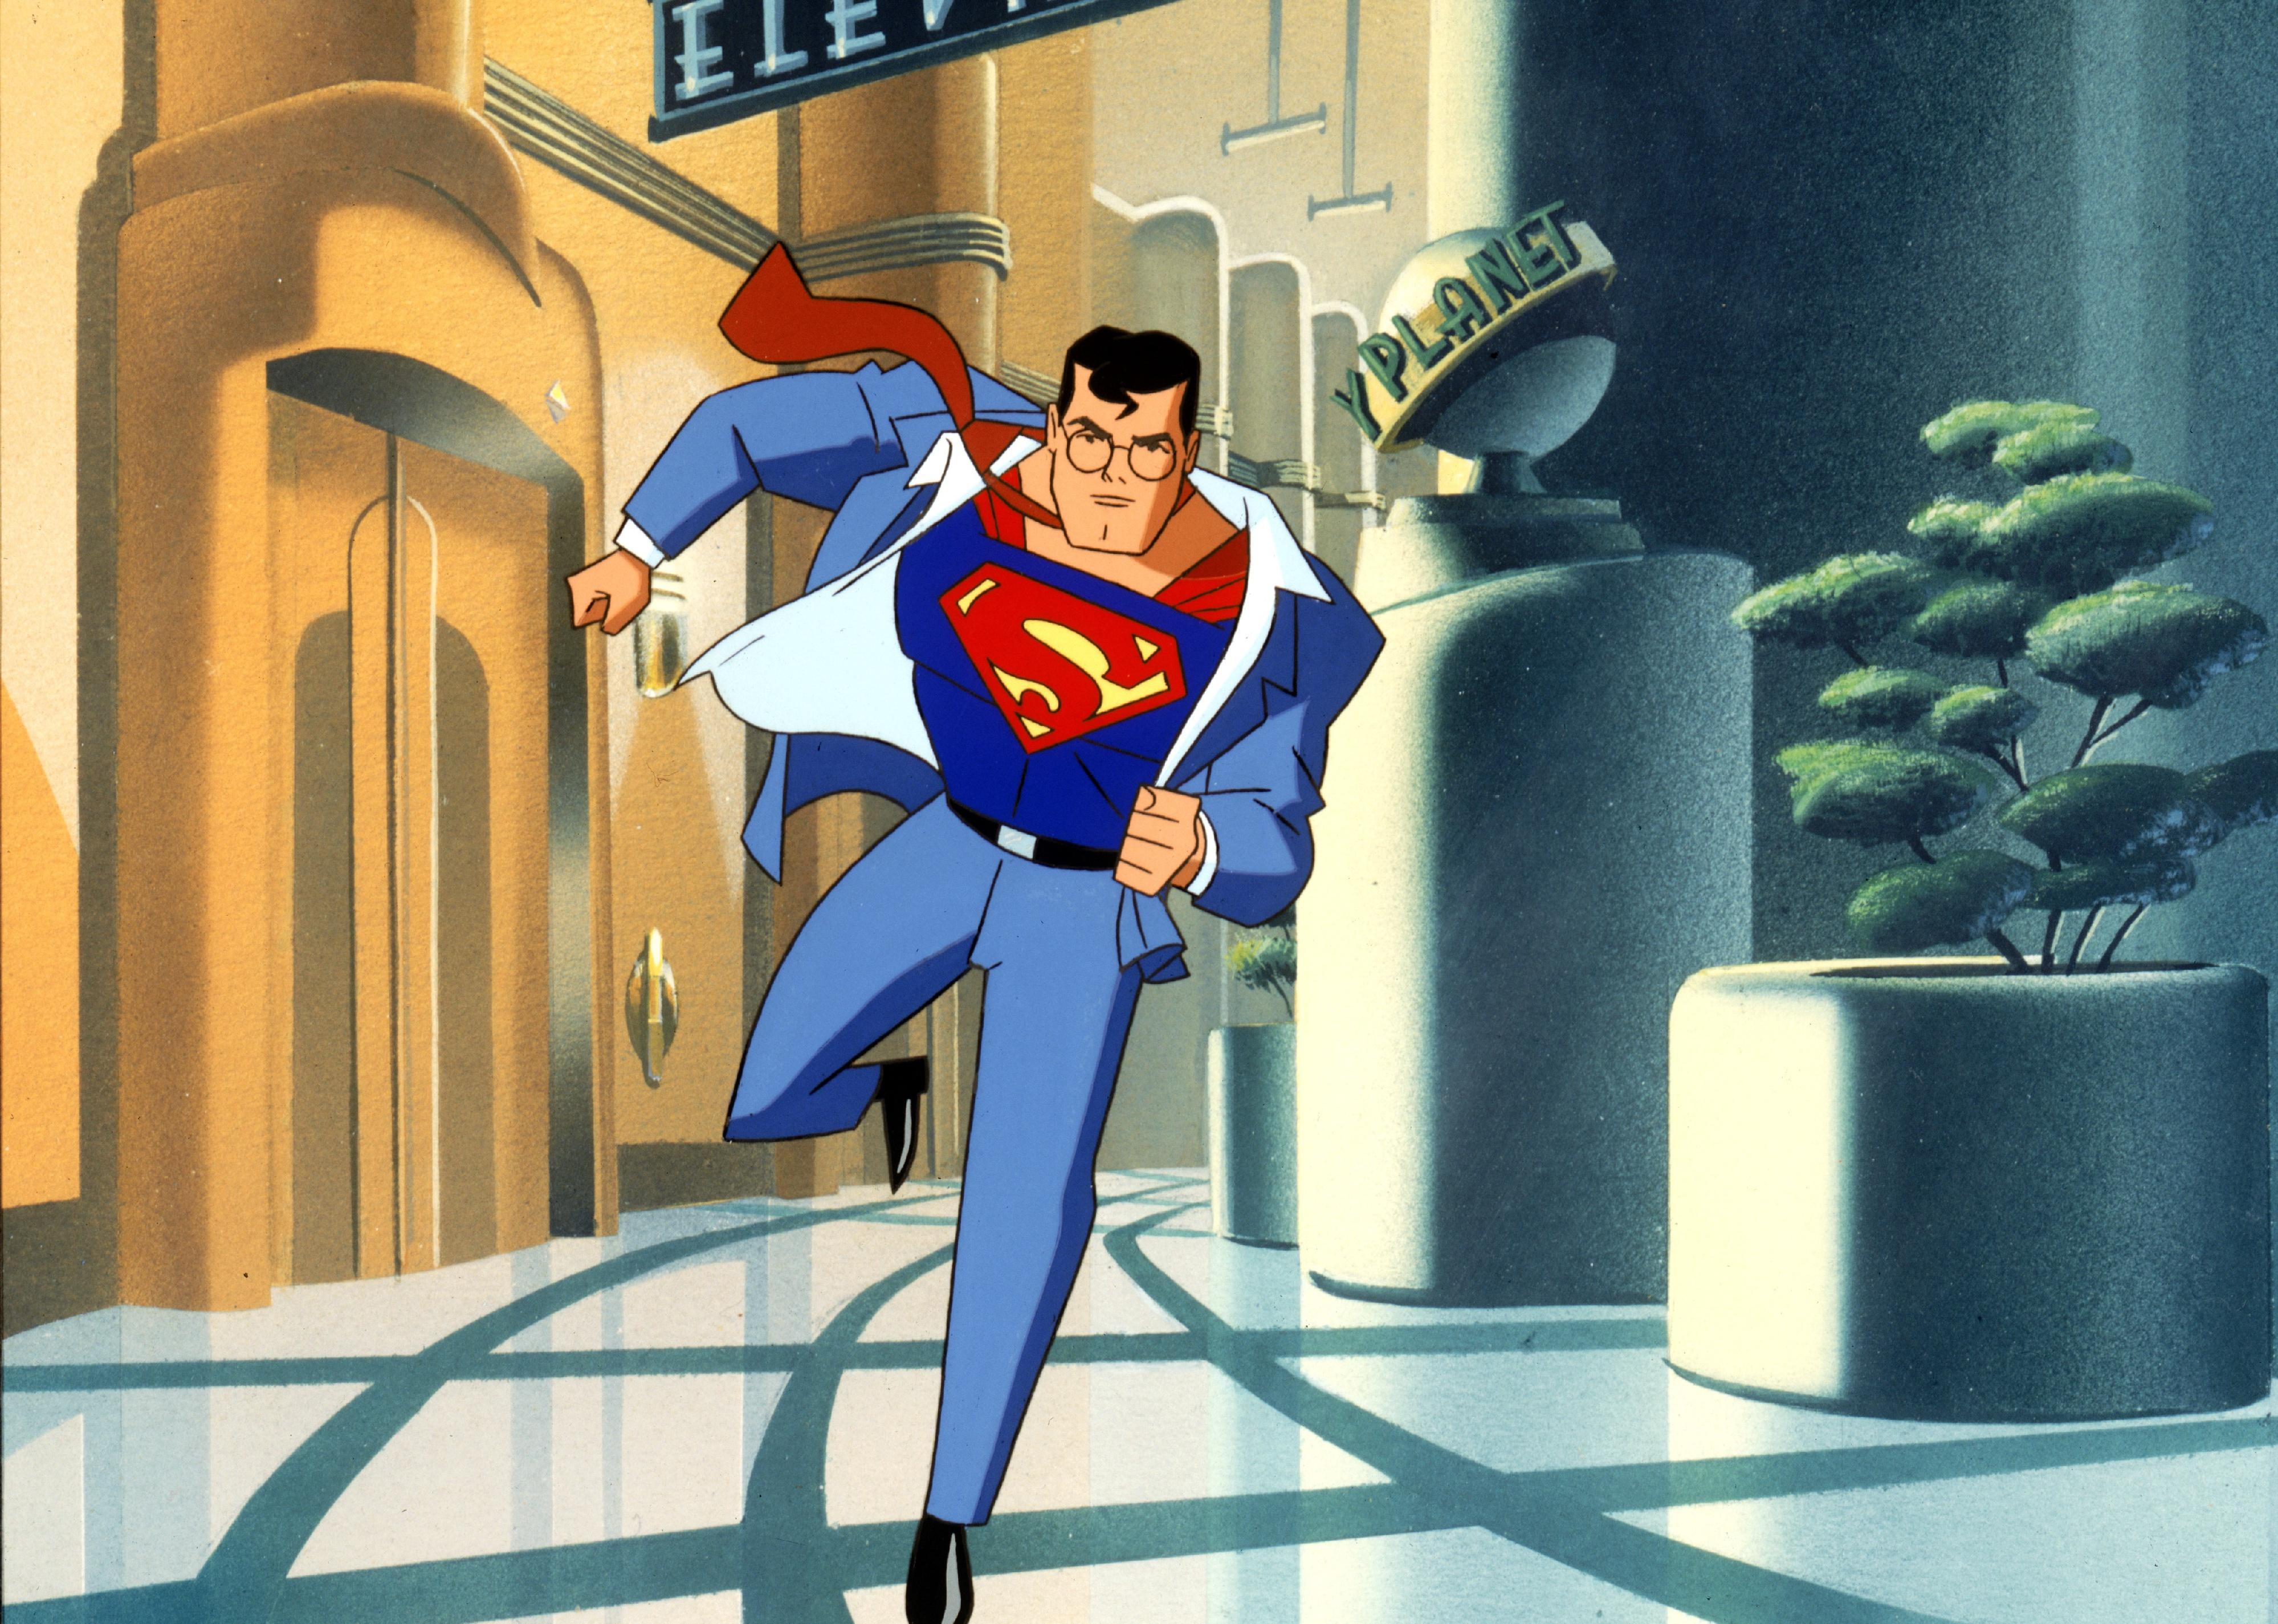 A cartoon of superman changing into his superhero costume while running.